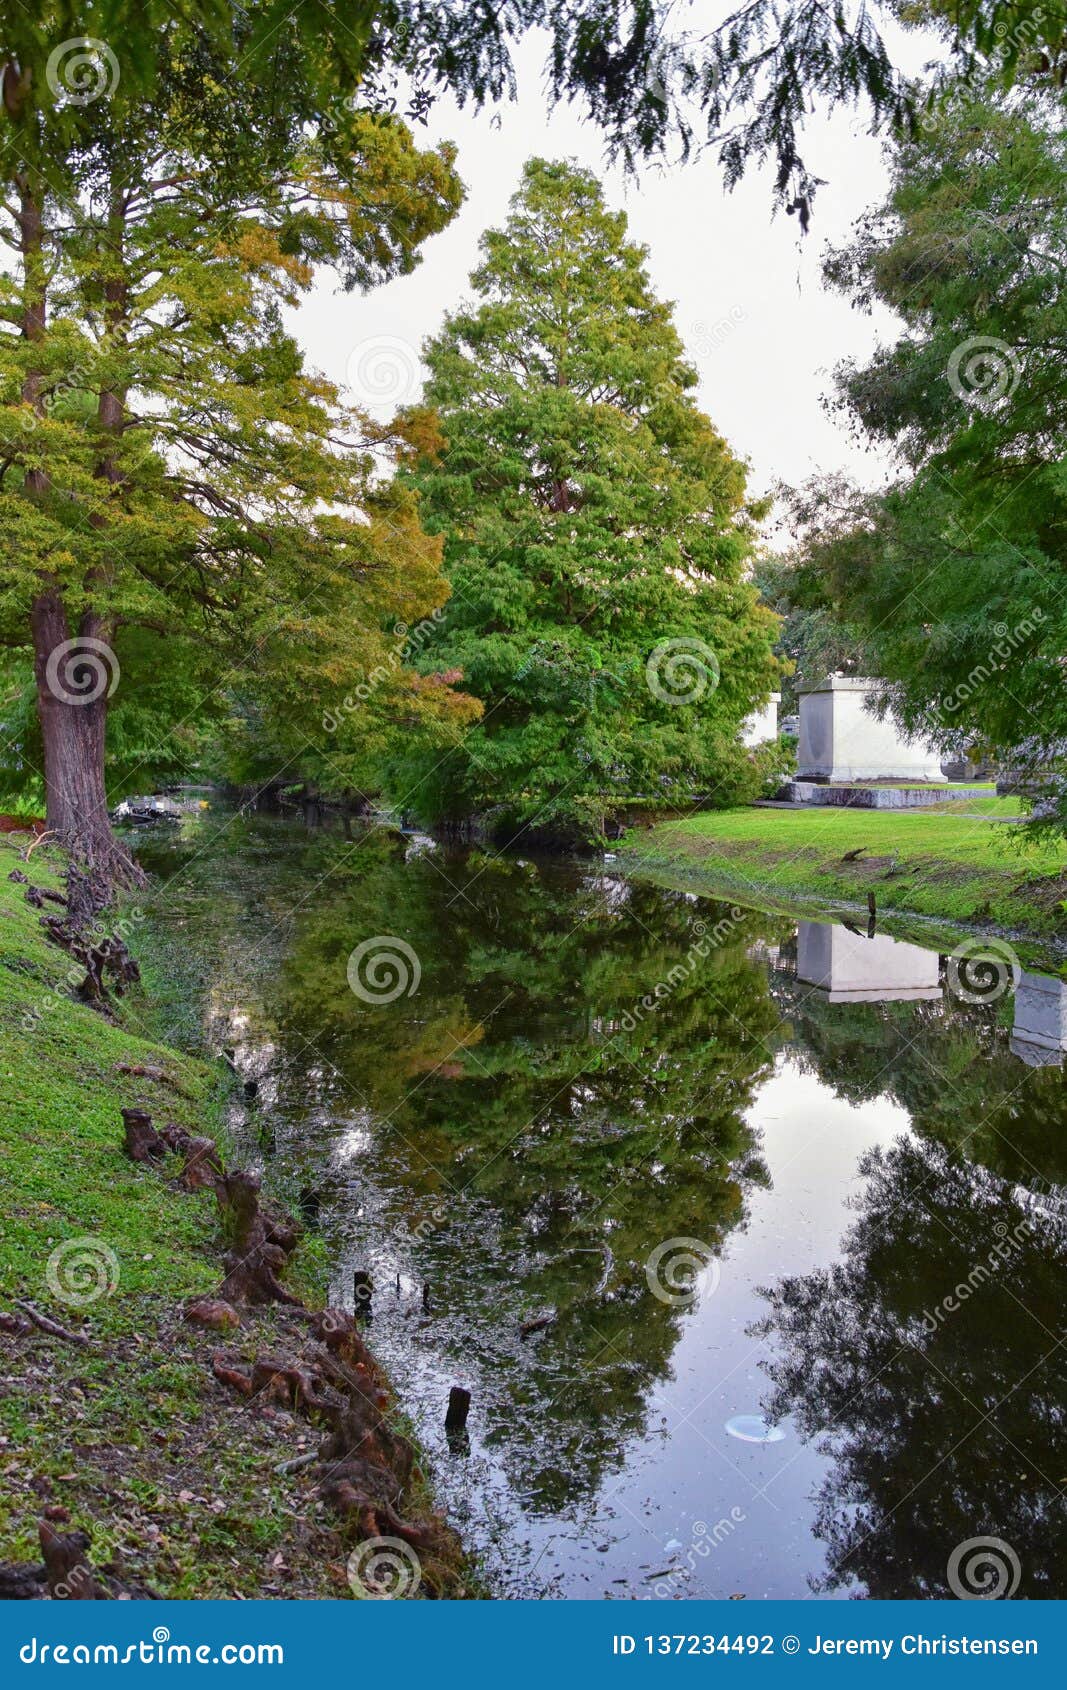 views of trees and unique nature aspects surrounding new orleans, including reflecting pools in cemeteries and the garden district